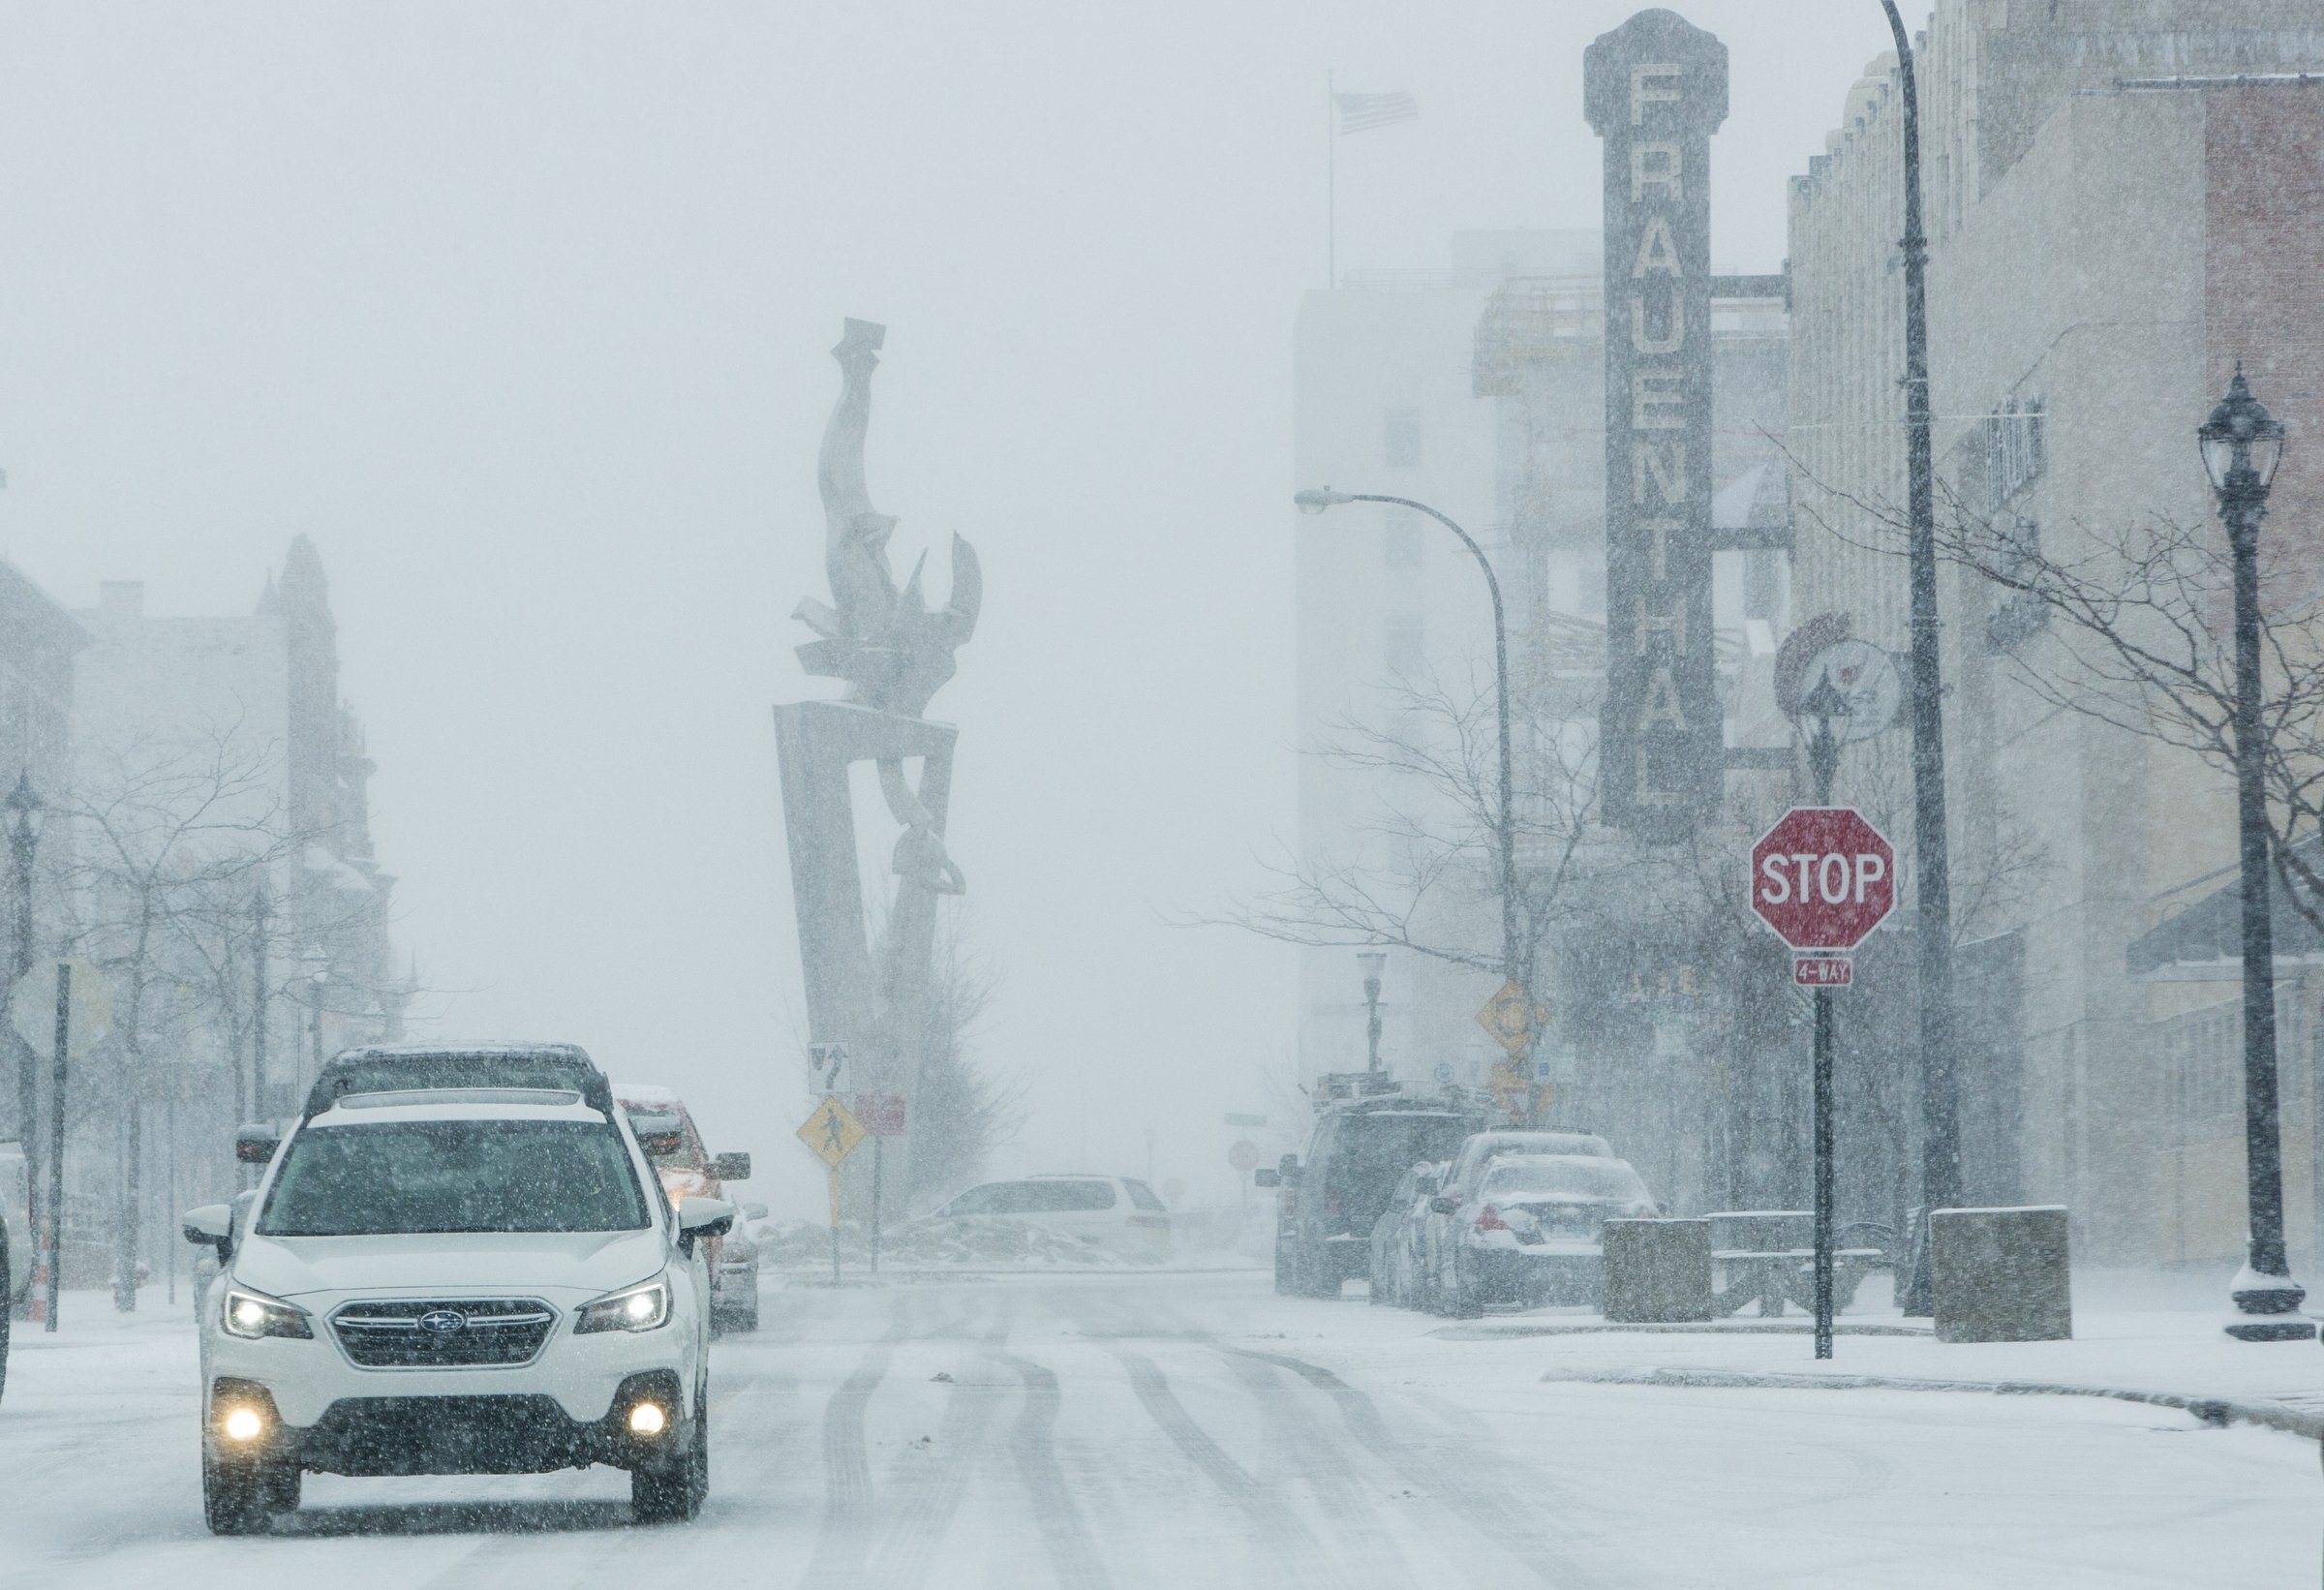 PHOTO: Vehicles drive through a snow storm in downtown Muskegon, Mich., April 4, 2018. A spring storm dumped more than a foot of snow in parts of Michigan's northern Lower Peninsula. 